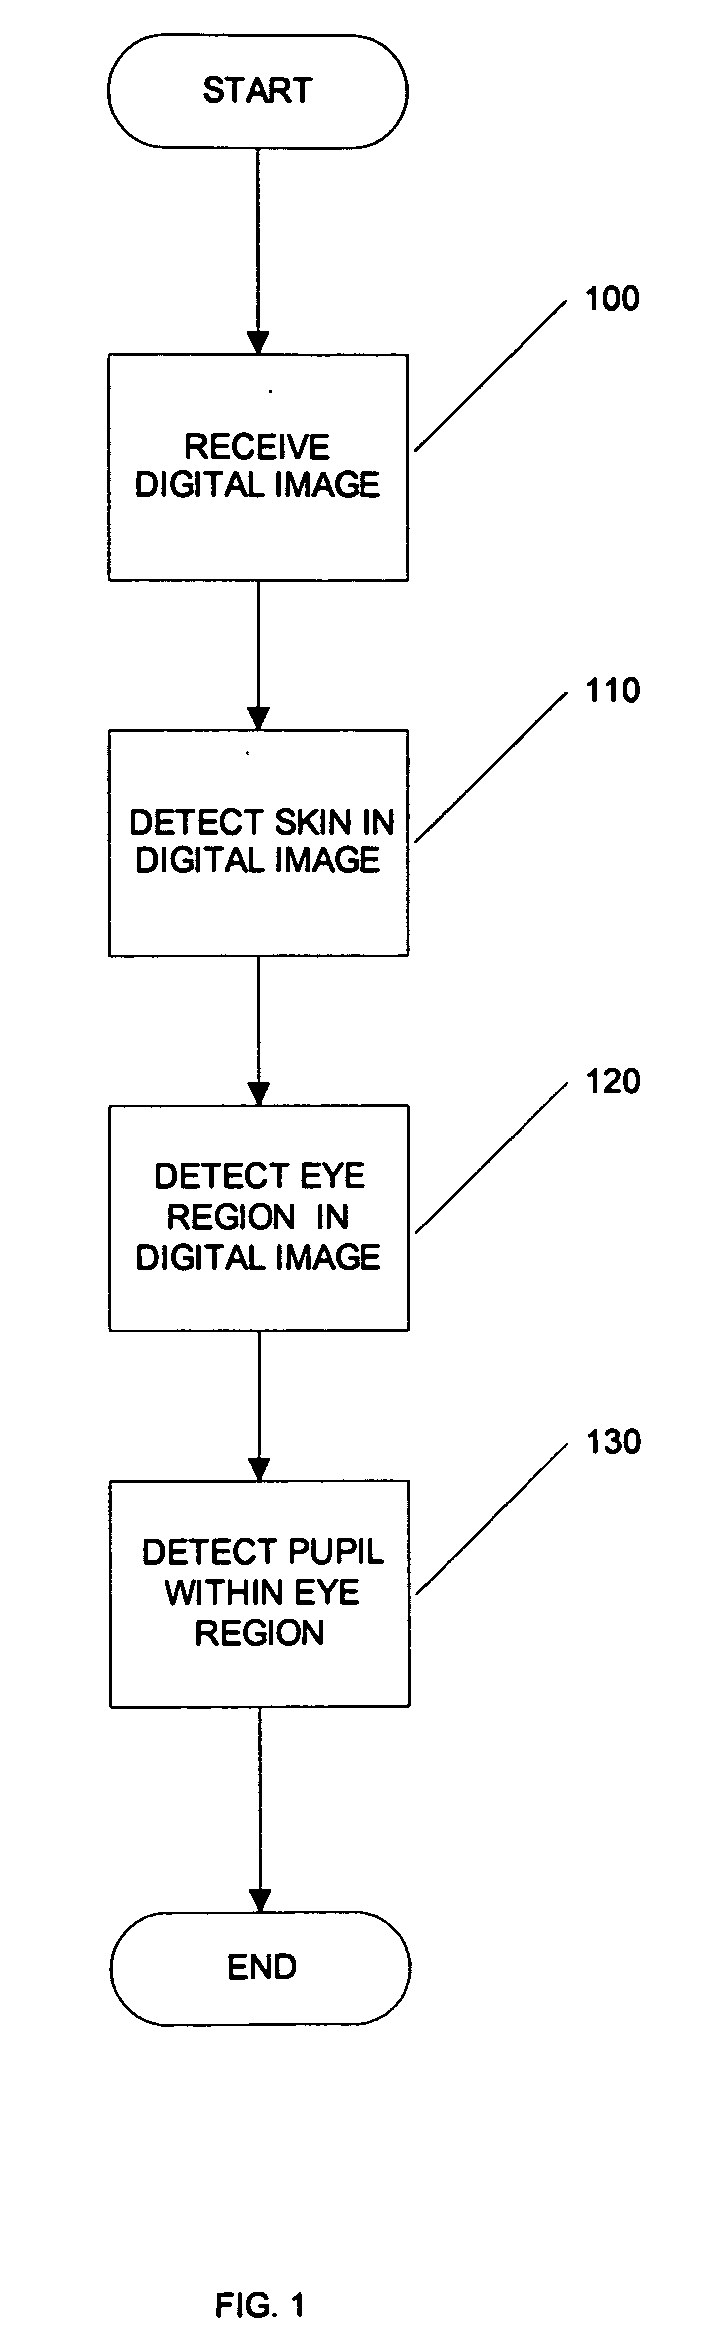 Systems and methods for detecting skin, eye region, and pupils